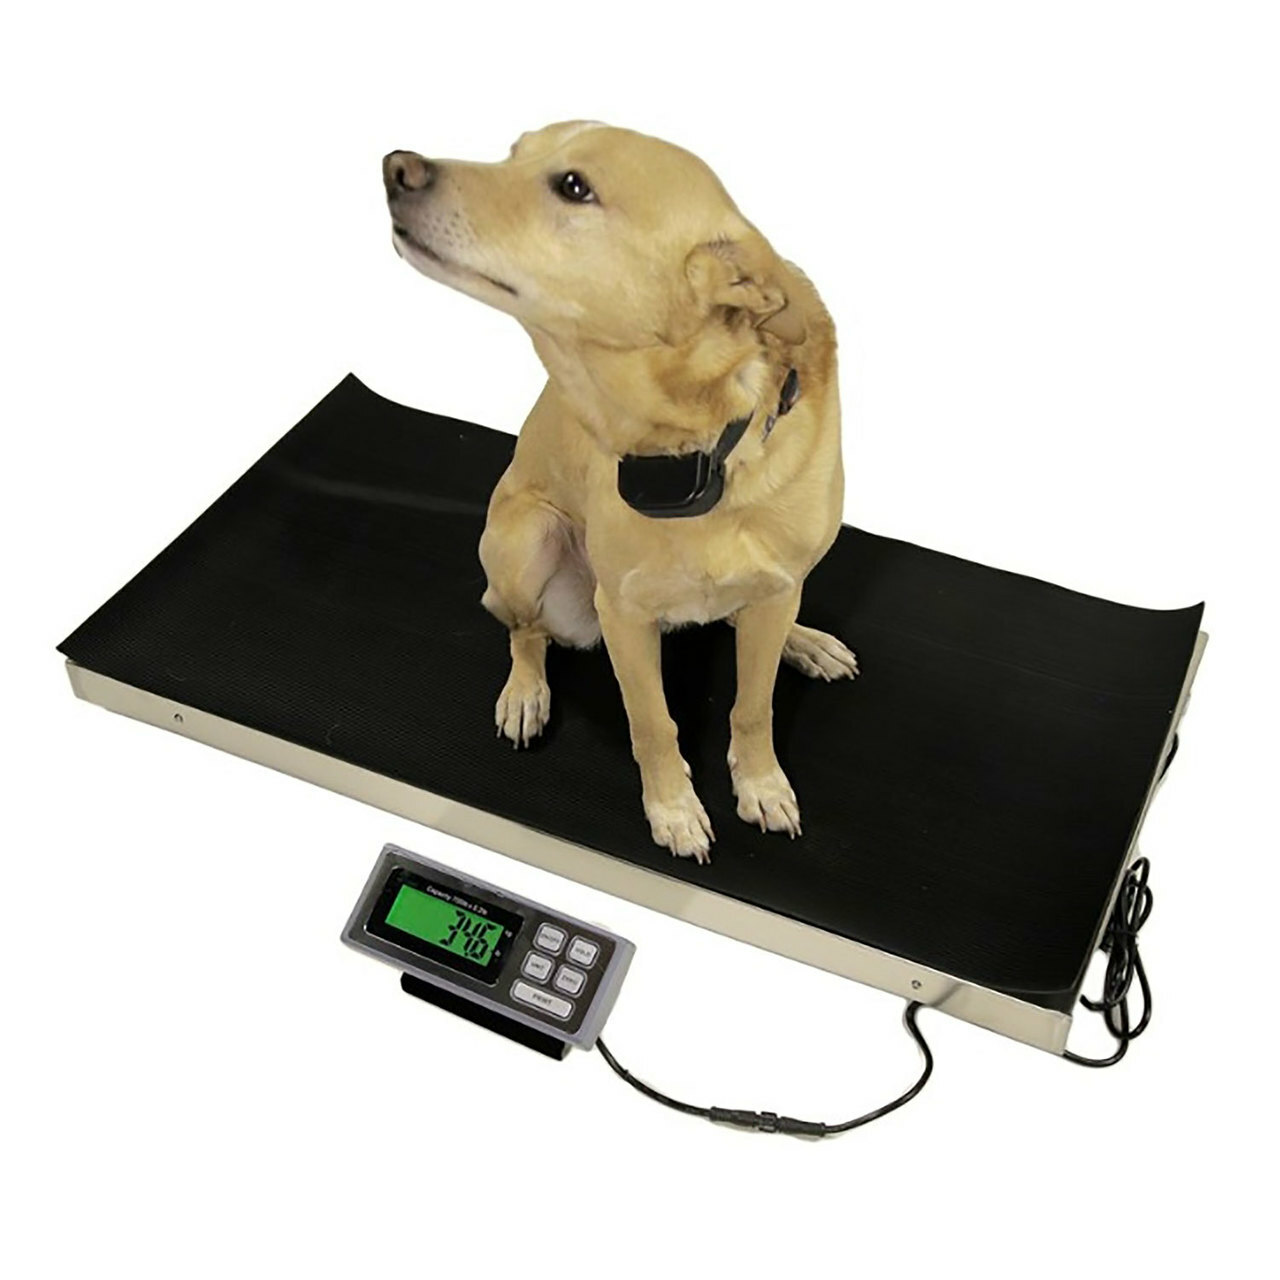 SmartHeart Analog Body Weight Scale | Mechanical Scale | 286 lbs 130 kg  Capacity | Non-Skid | Simple Dial Calibration